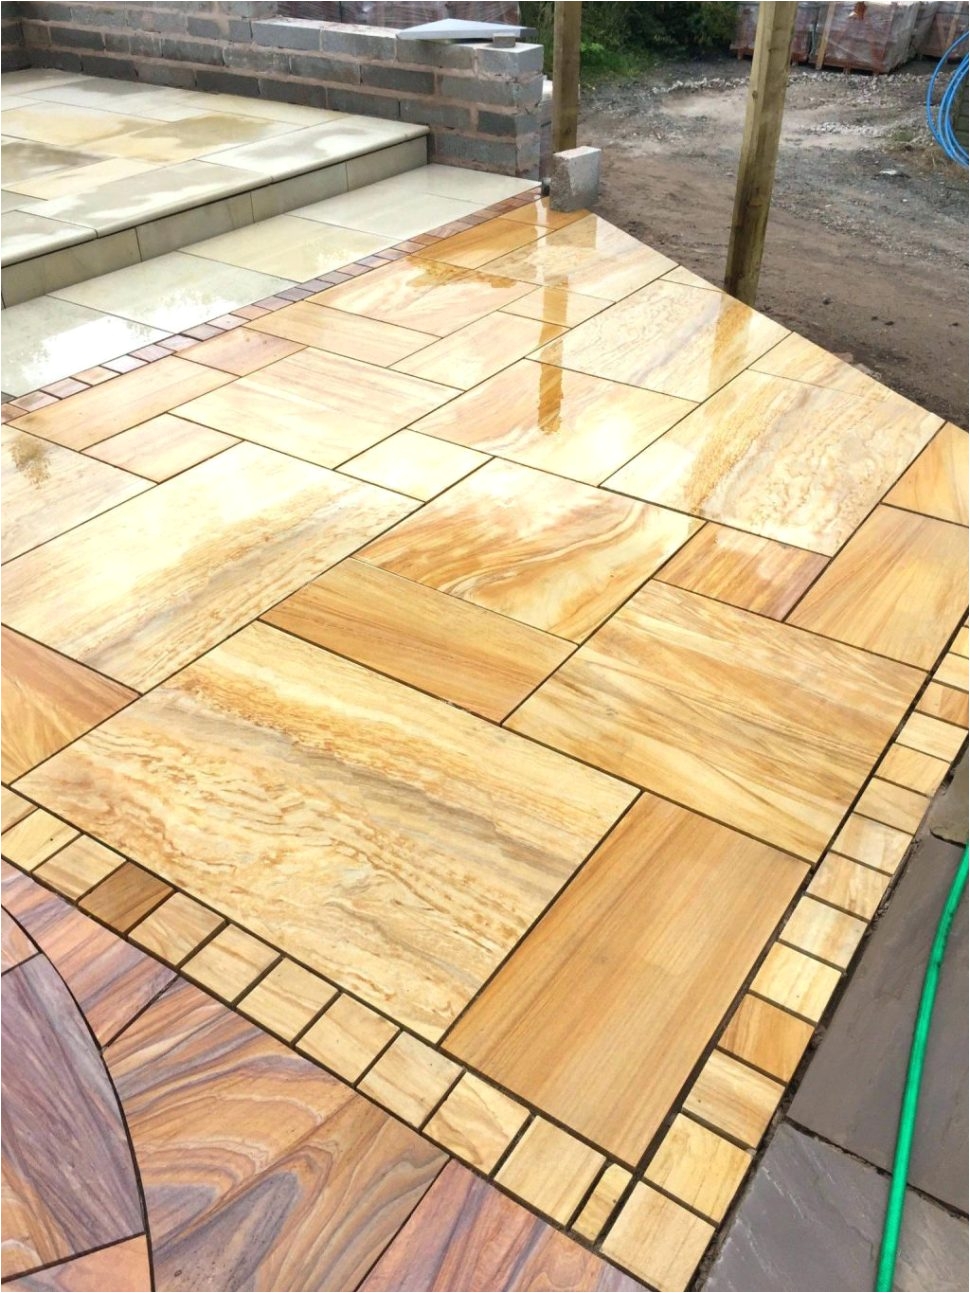 large size of patio patioeas spanish tile teakwood sawn smooth easy backyard flooreasaffordable cheap for